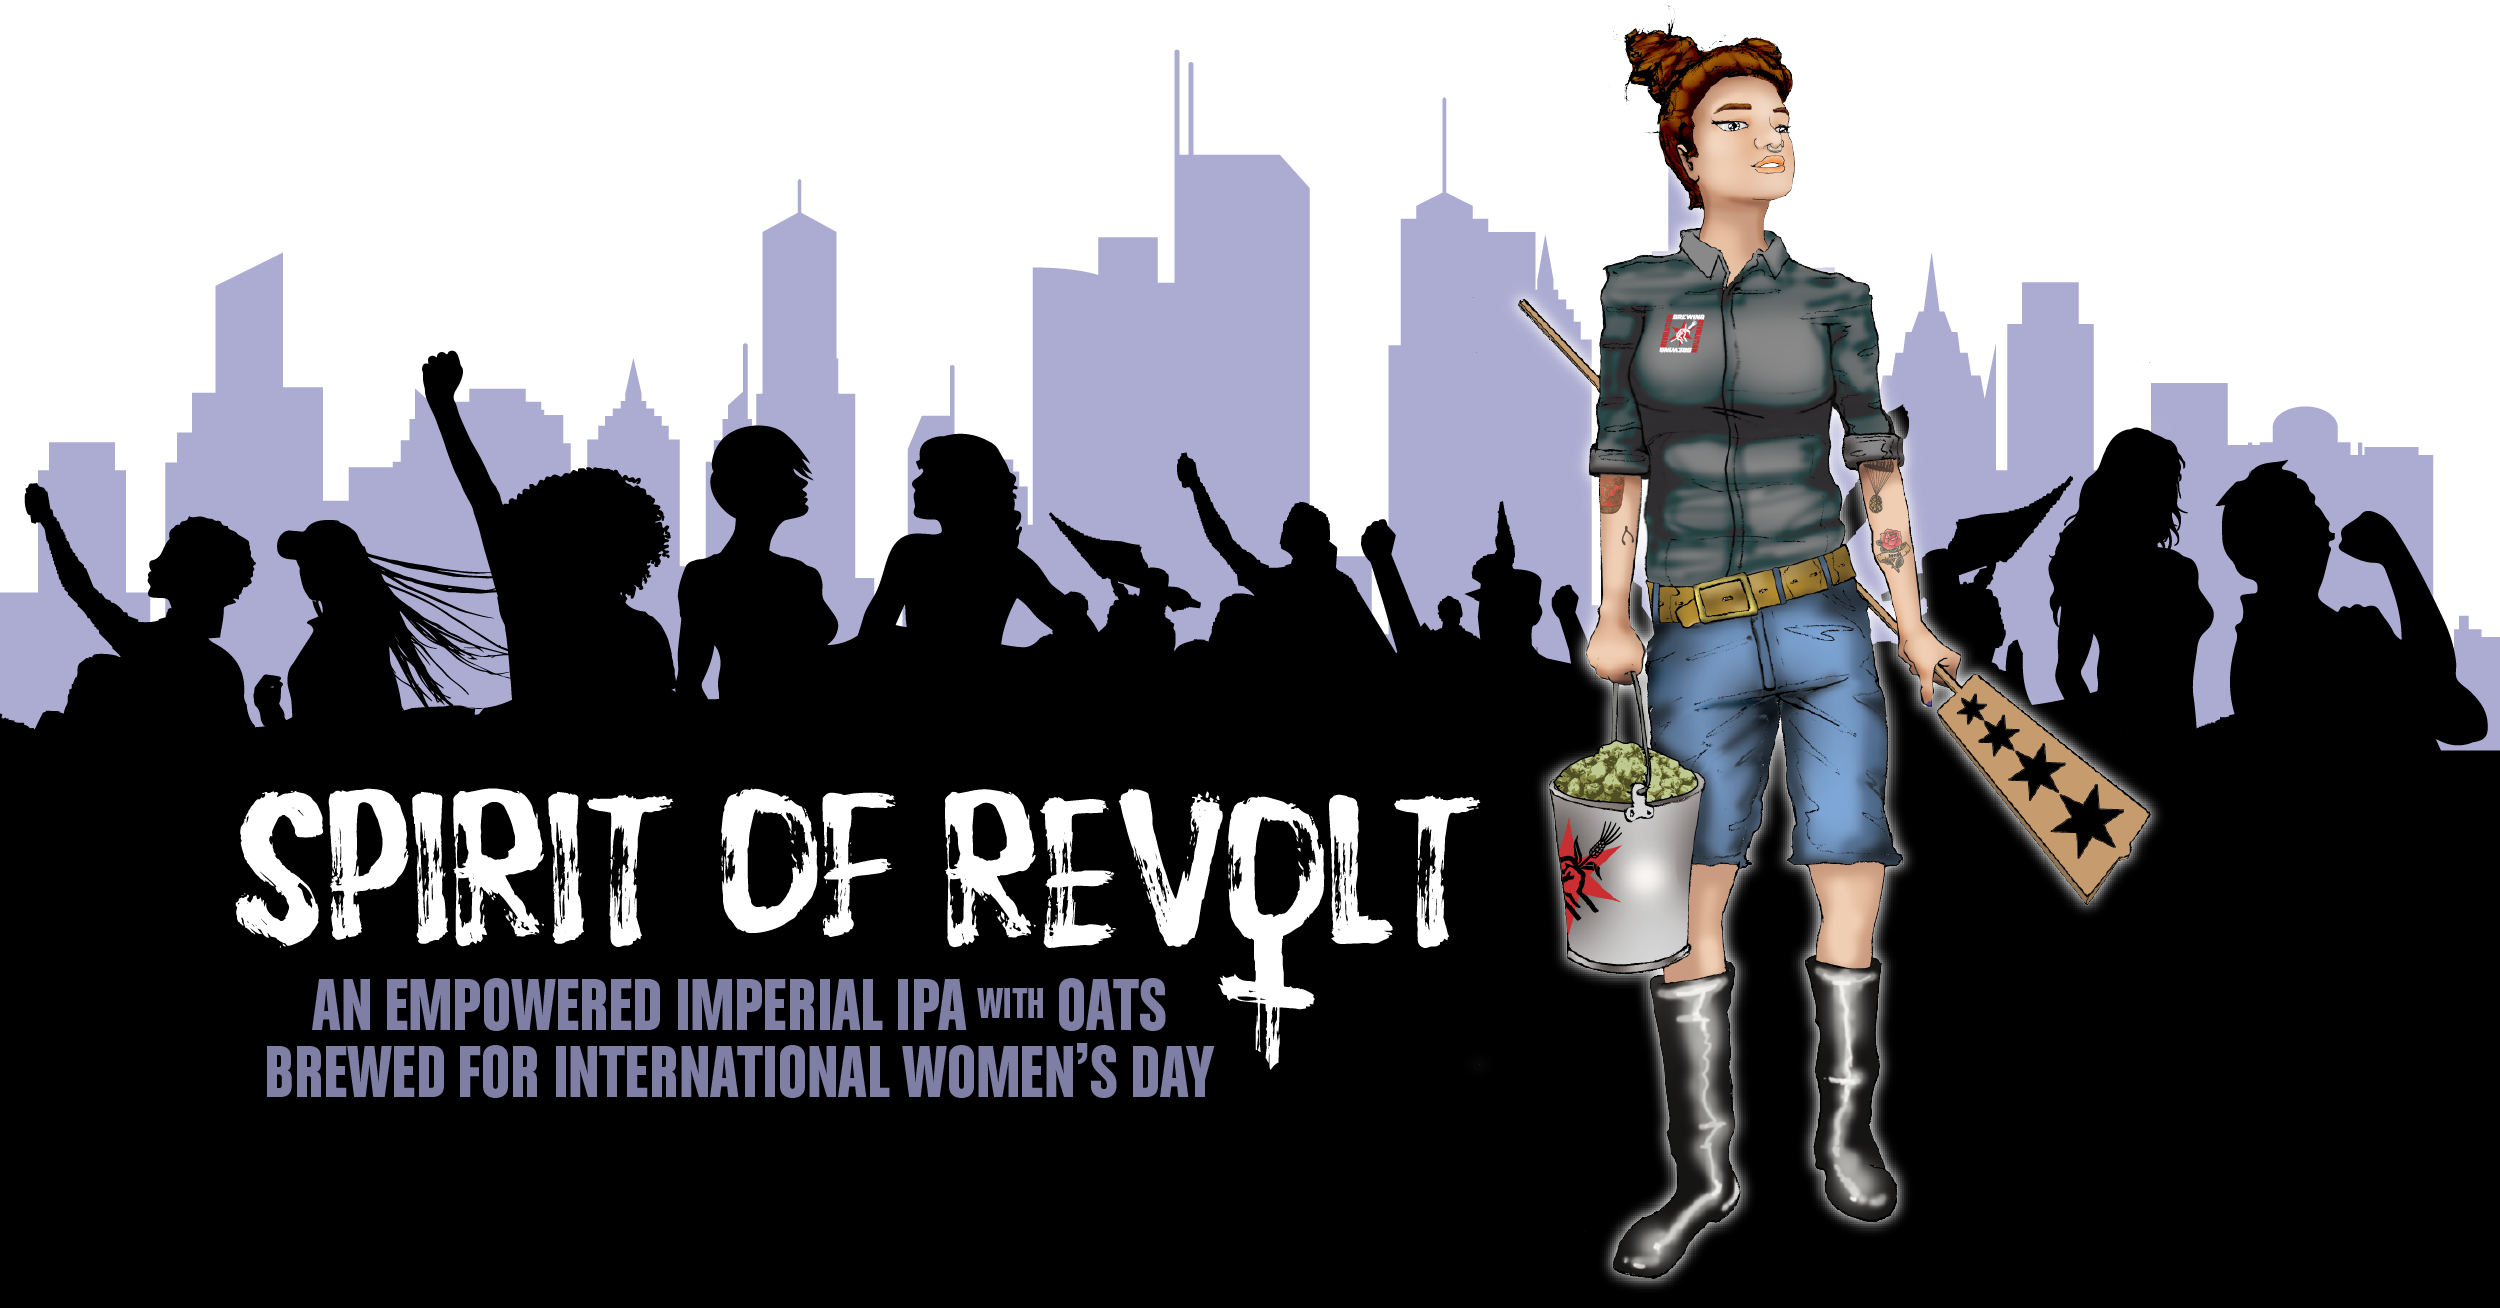 Revolution Brewing Created a New IPA to Celebrate International Women’s Day